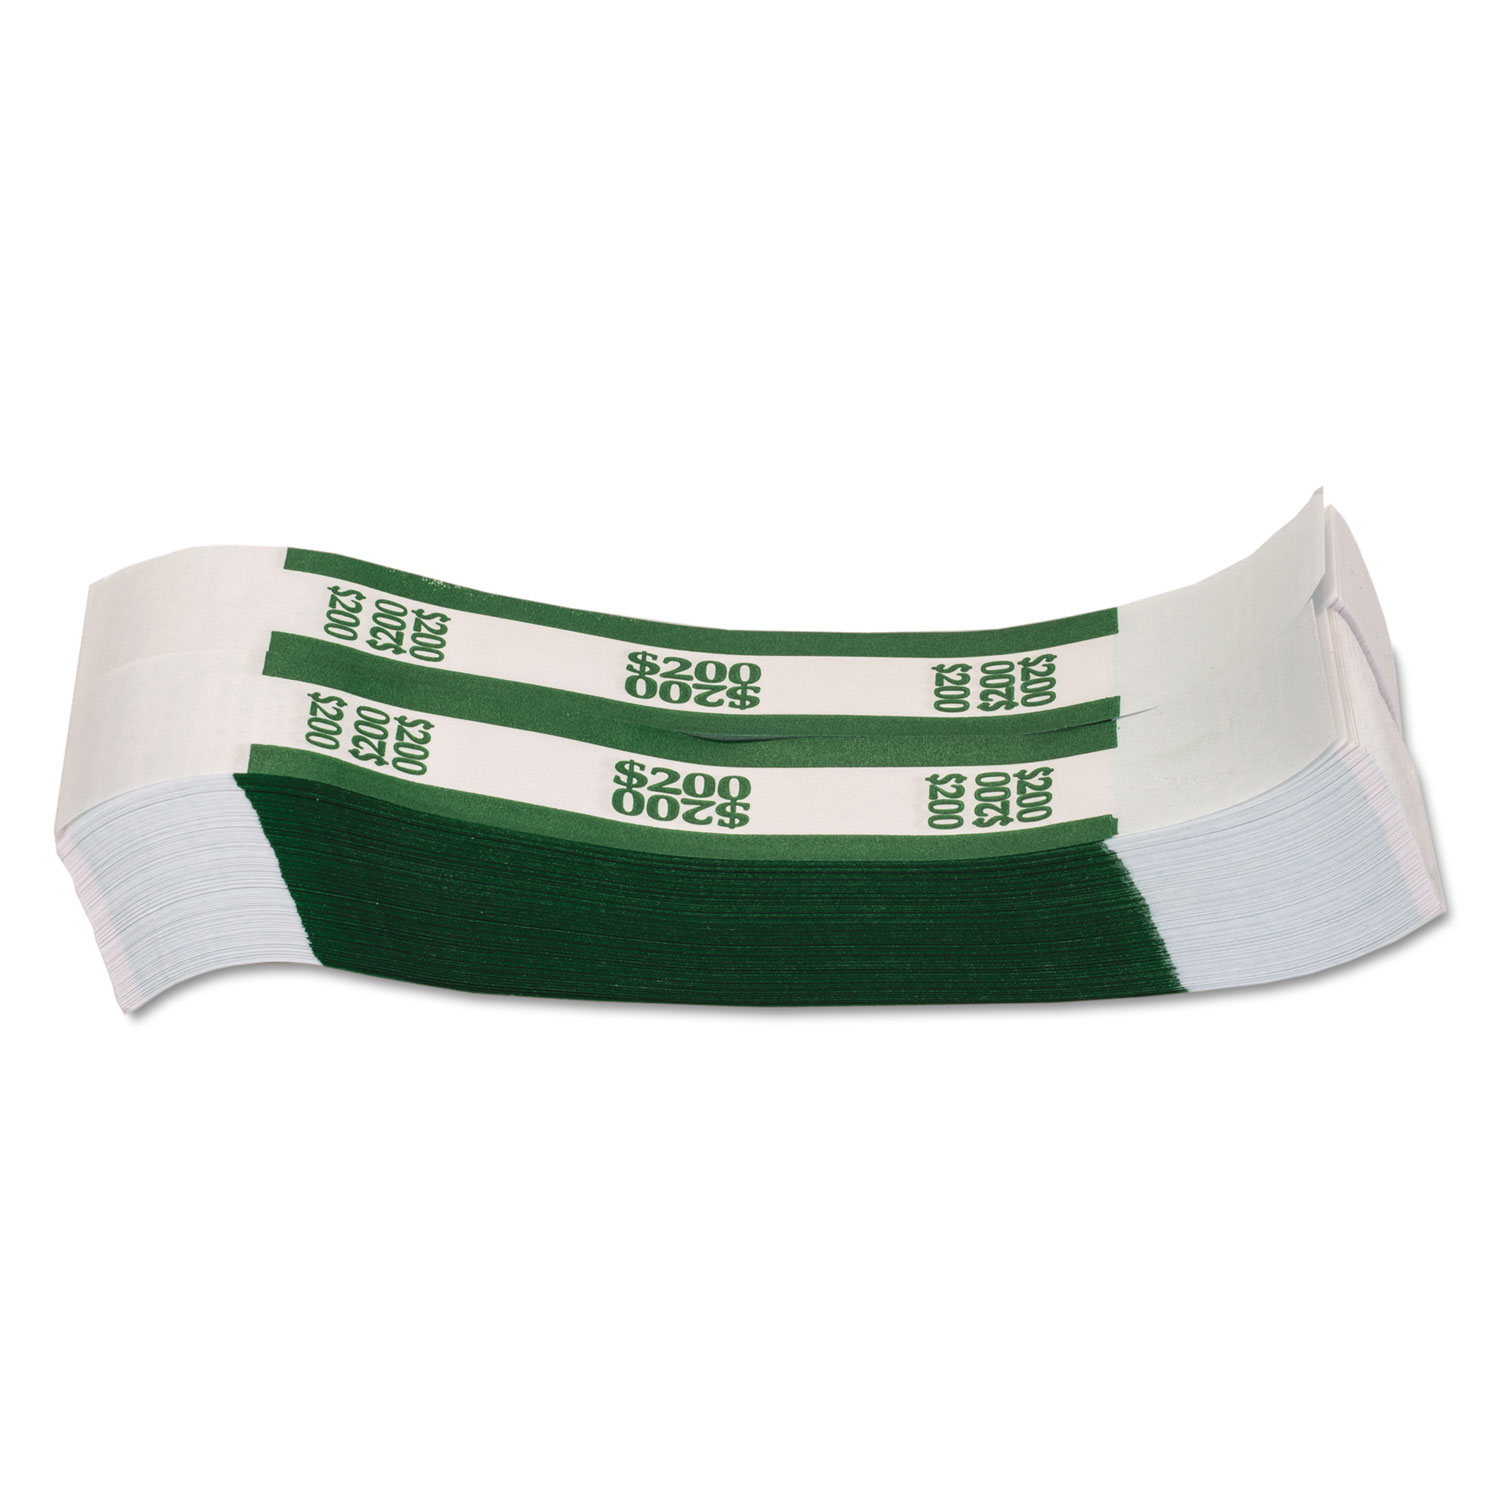 Pap-R Products Currency Straps, Green, $200 in Dollar Bills, 1000 Bands/Pack